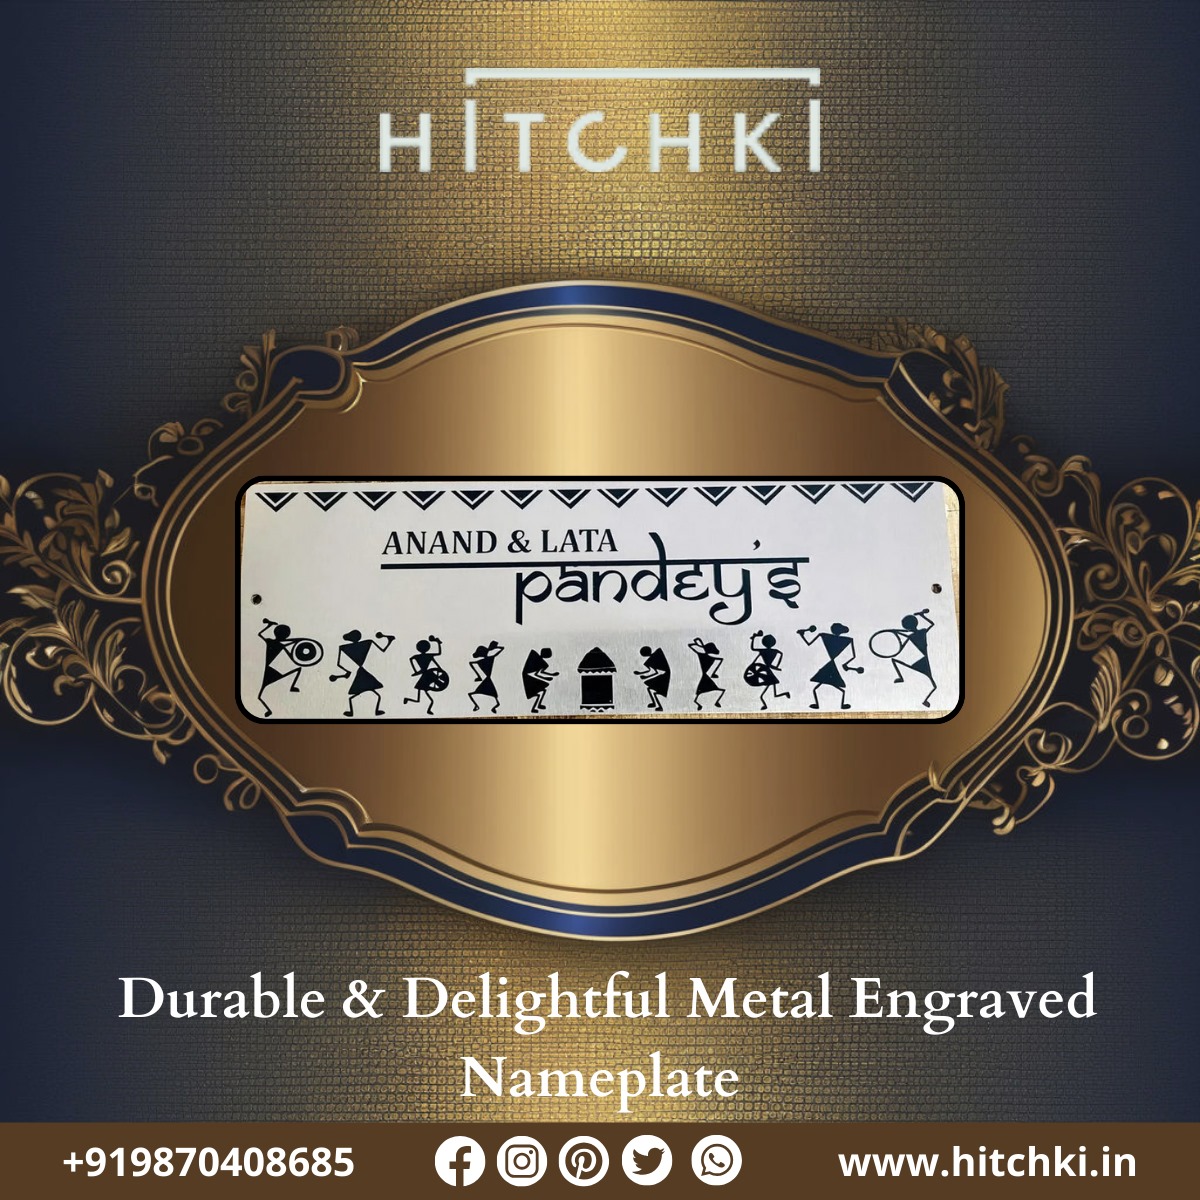 Discover the Charm of Durable & Delightful Metal Engraved Nameplates